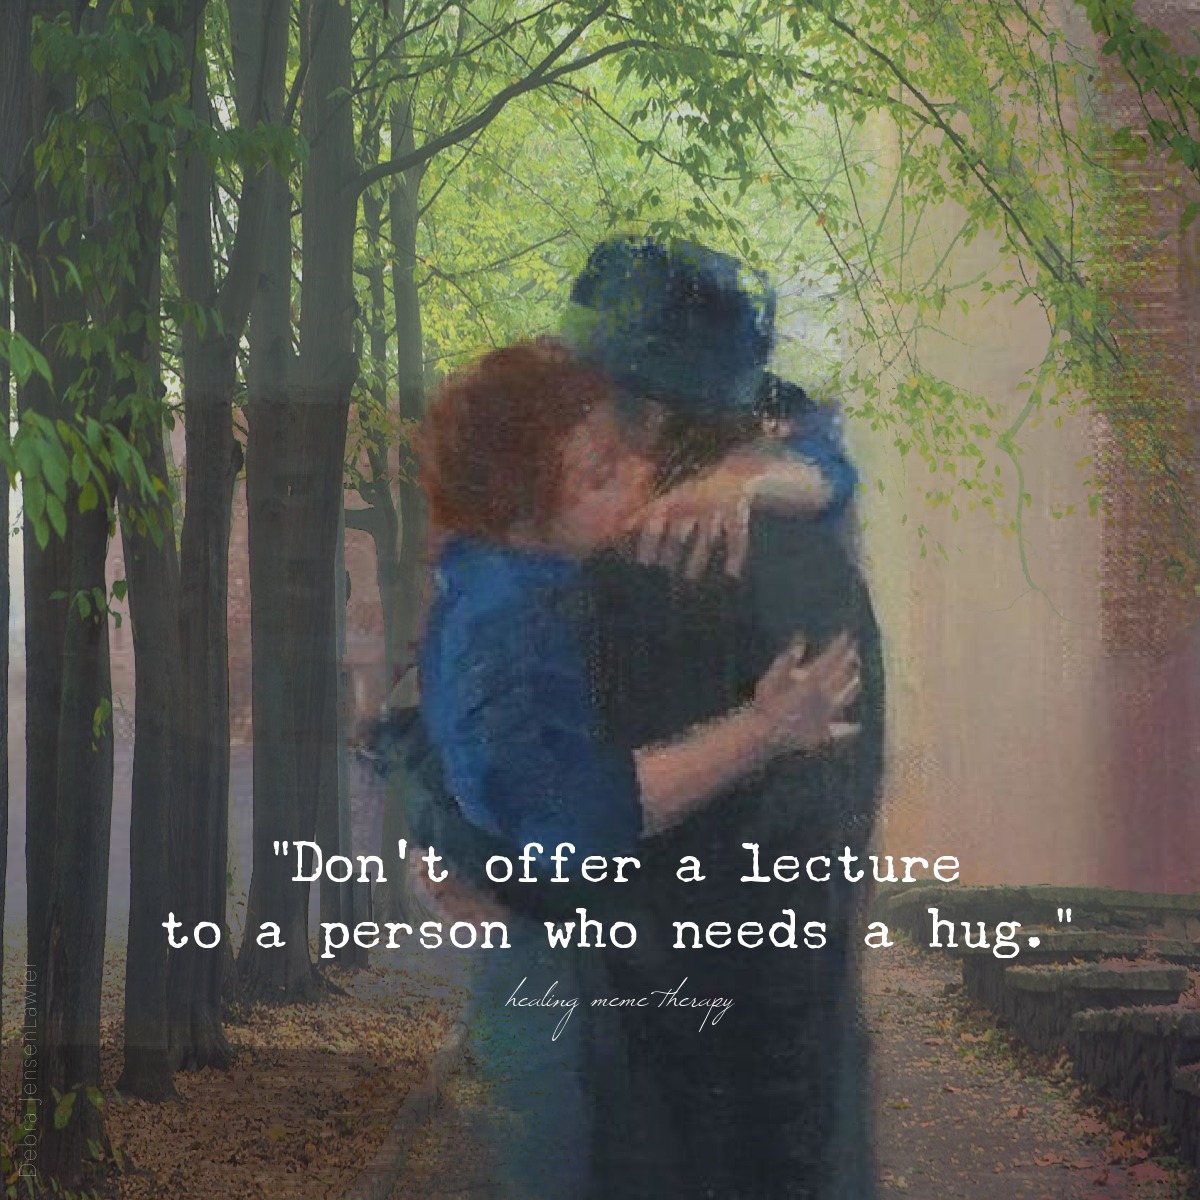 Don't offer a lecture to a person who needs a hug. ~ Exactly! There's always a better time for all of that.